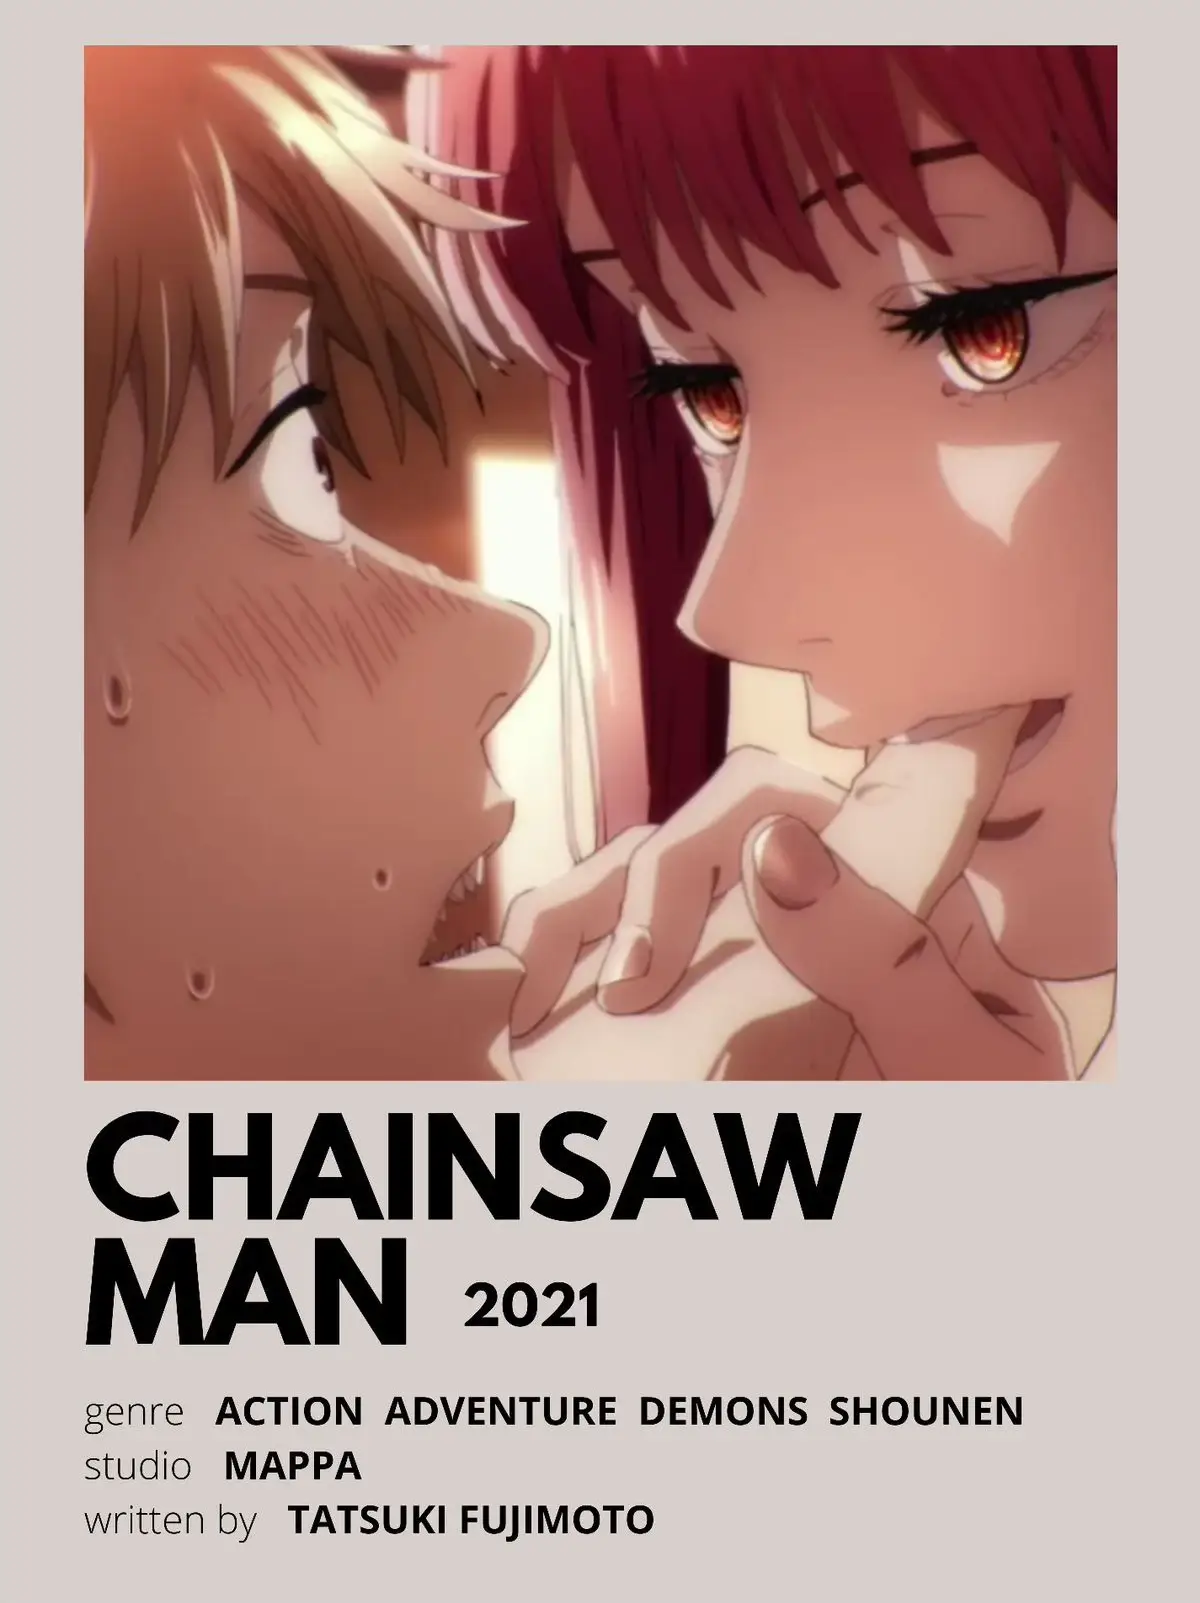 Chainsaw Man Episode 15 - Chapter 43-45